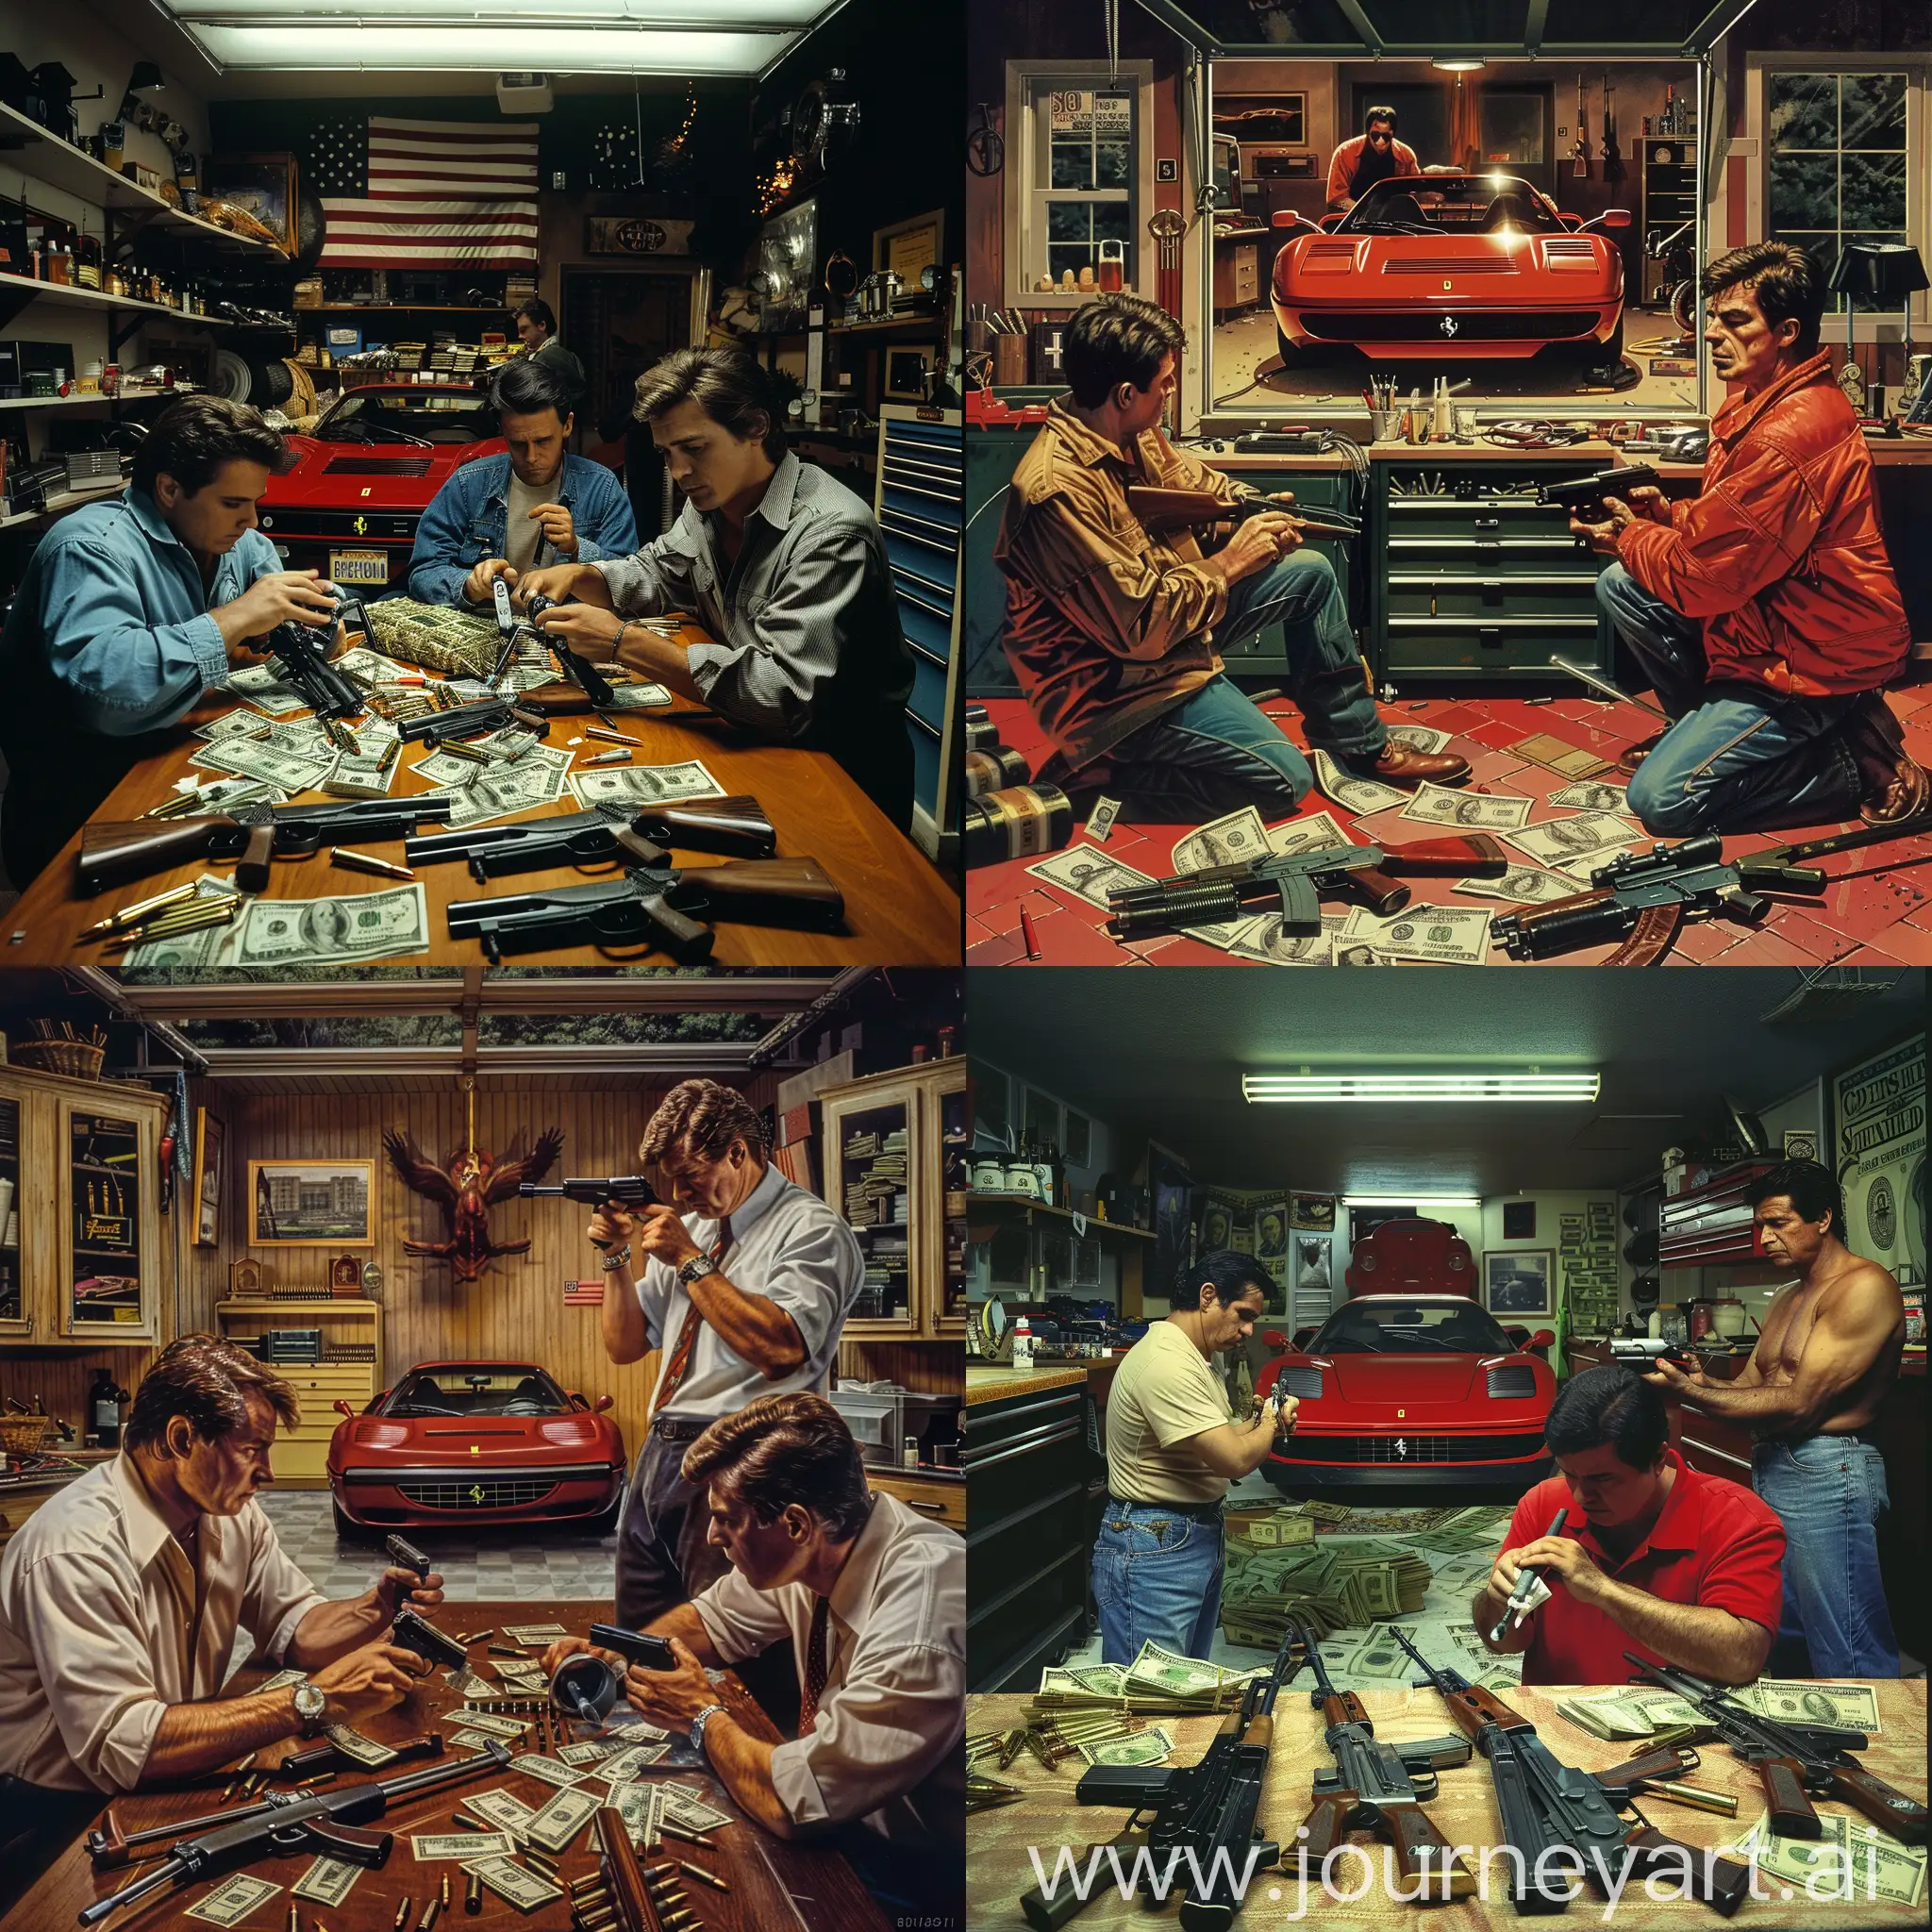 Man-Cleaning-Guns-in-Garage-with-Ferrari-and-Money